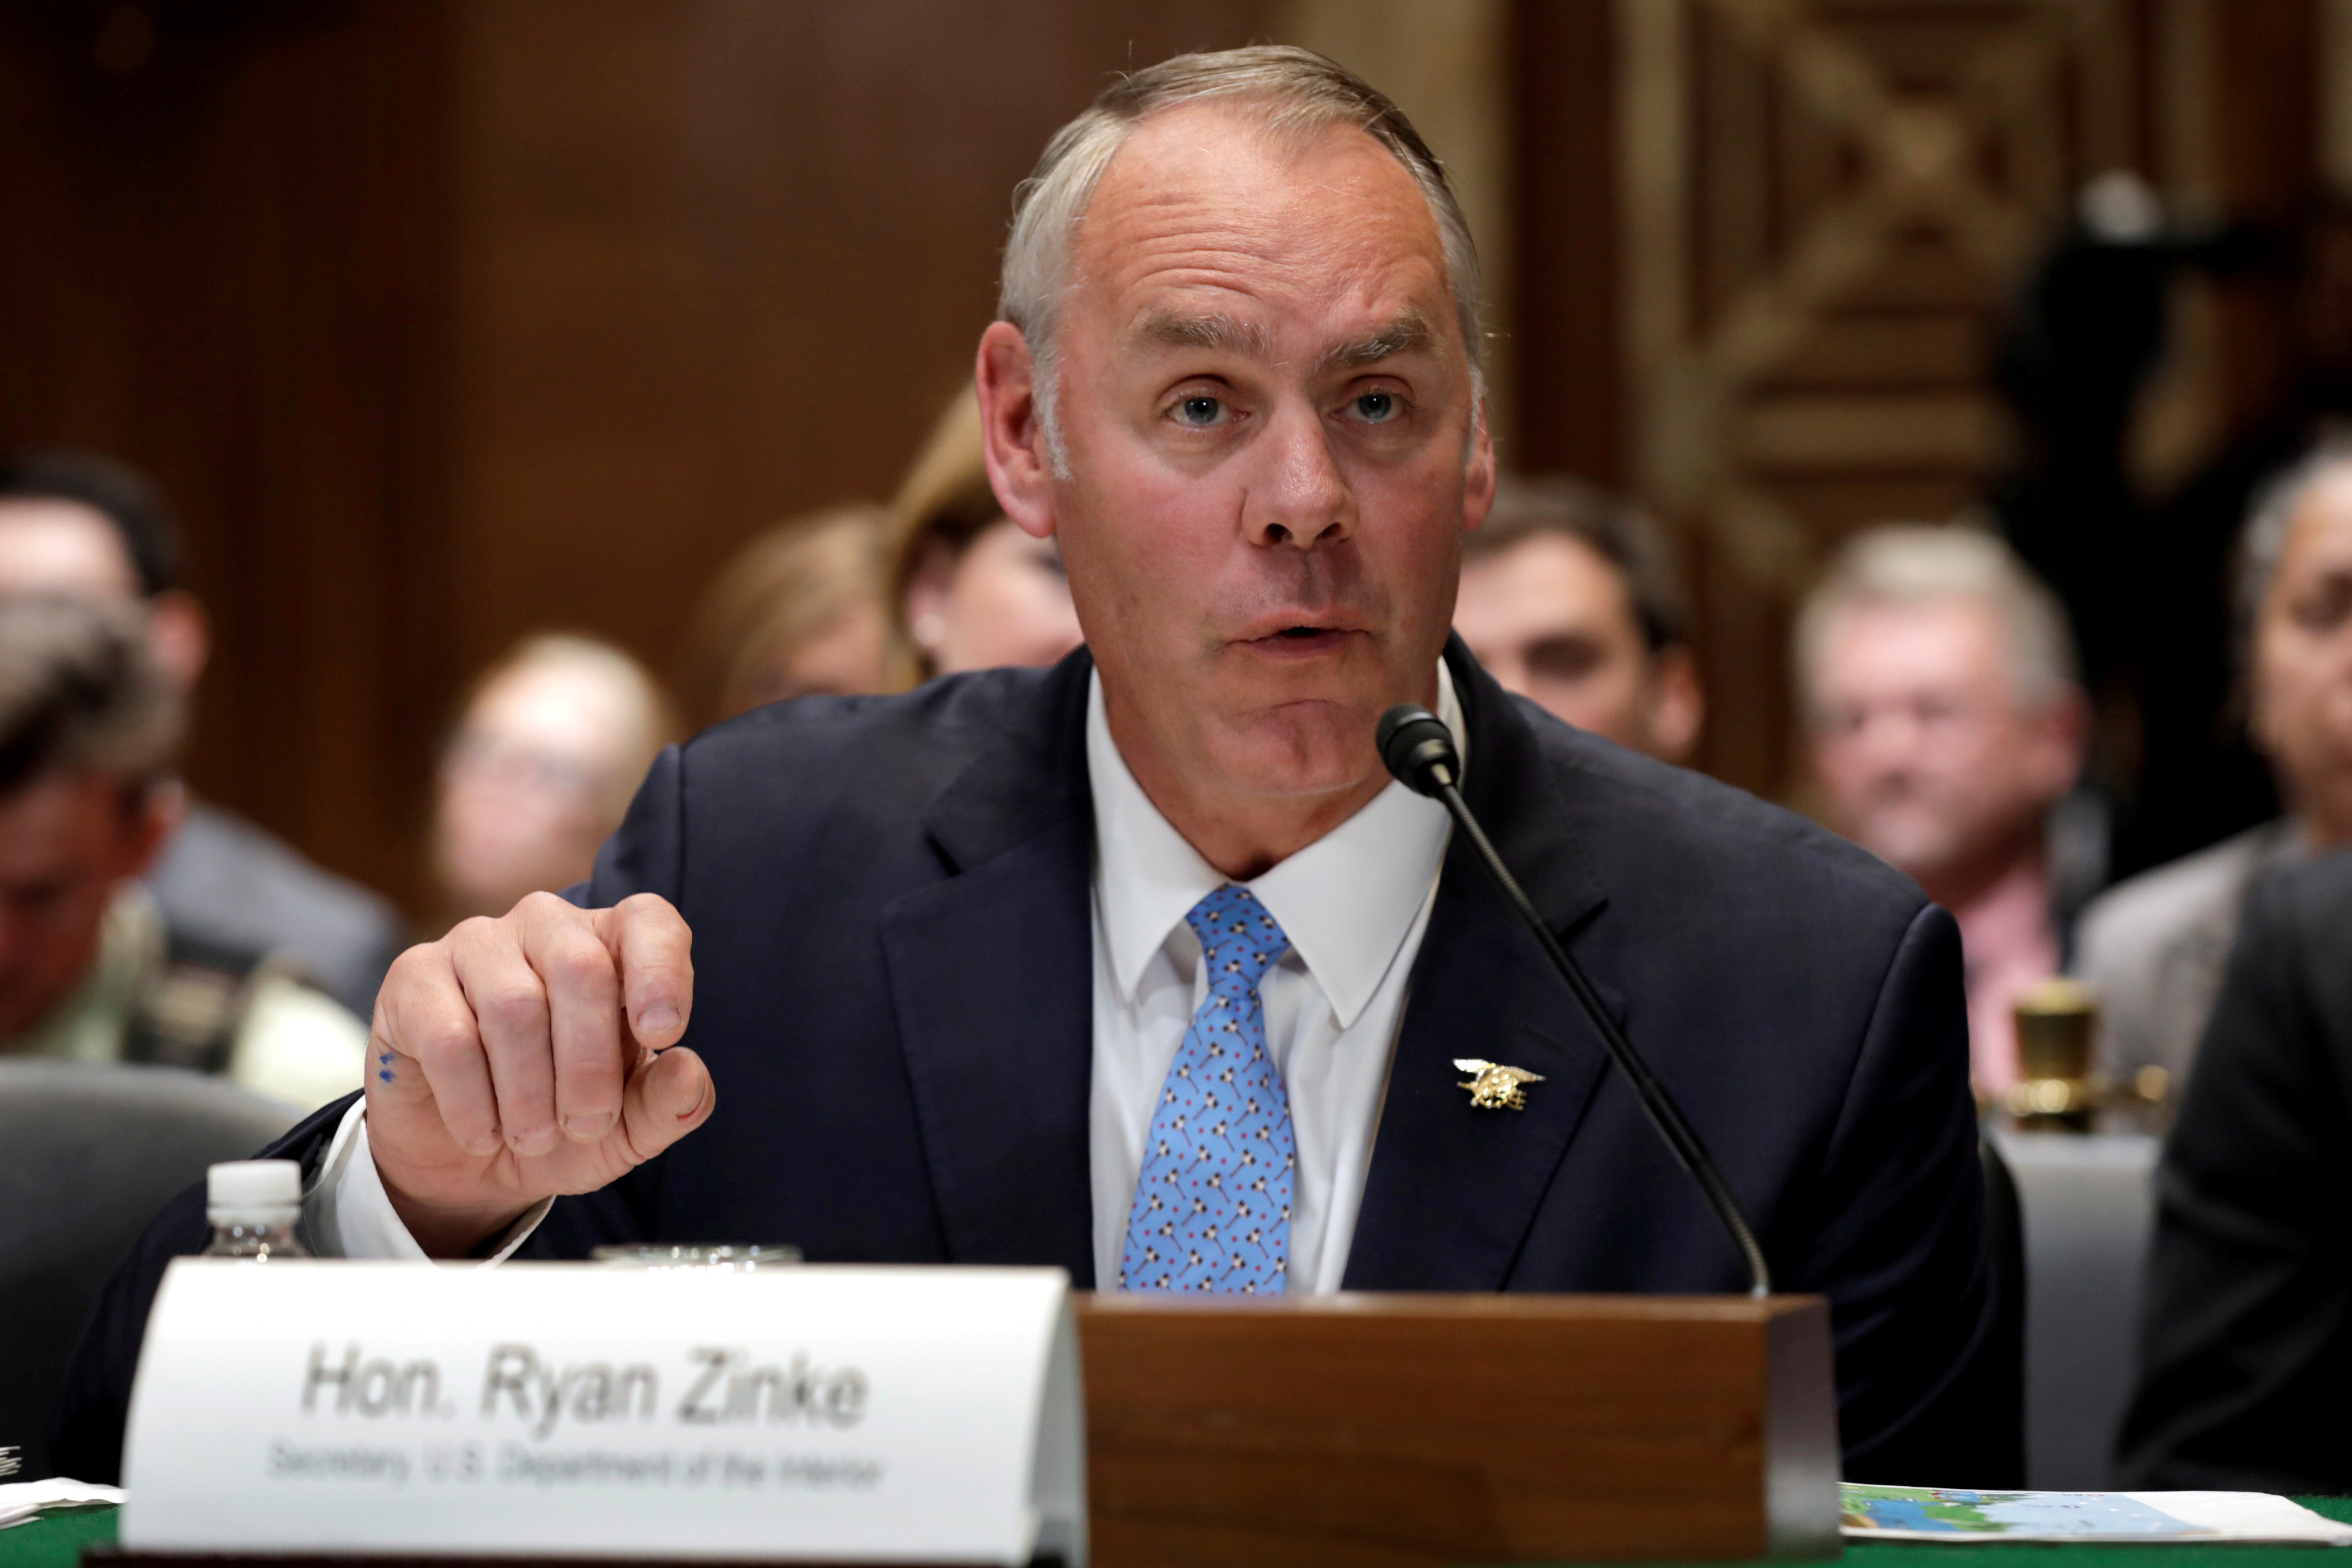 U.S. Interior Secretary Ryan Zinke testifies before a Senate Appropriations Interior, Environment and Related Agencies Subcommittee hearing on the FY2019 funding request and budget justification for the Interior Department, on Capitol Hill in Washington, U.S., May 10, 2018. REUTERS/Yuri Gripas